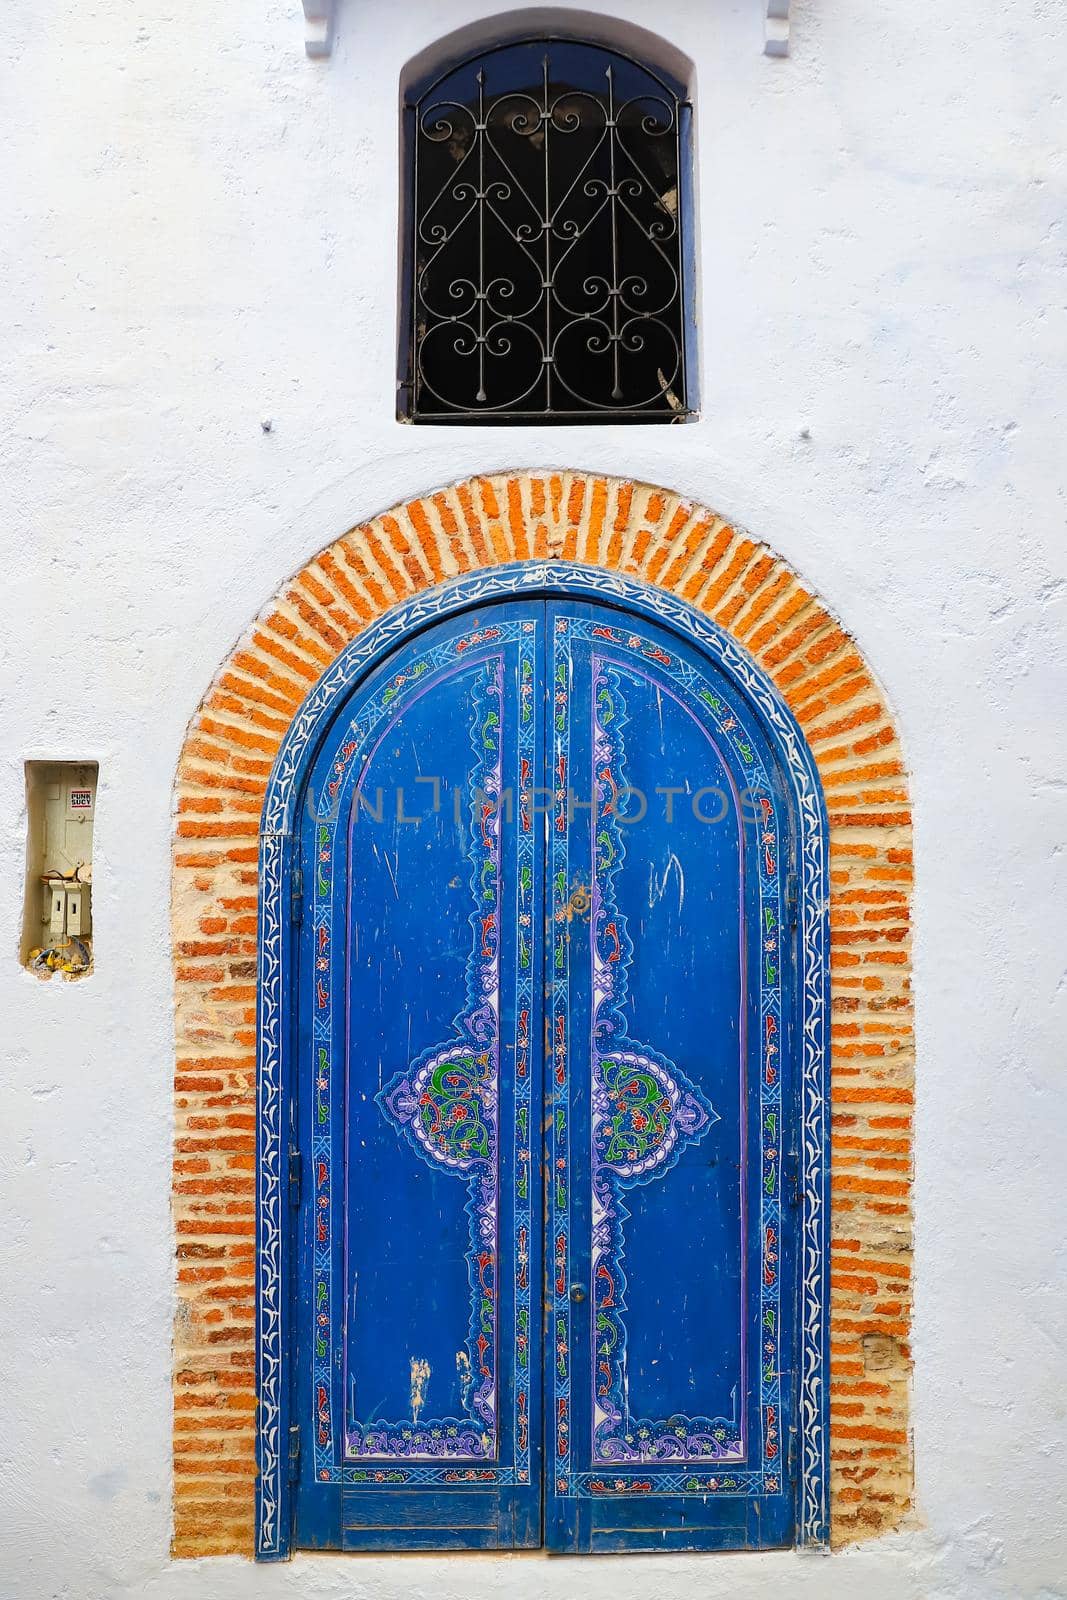 Door of a House in Chefchaouen City, Morocco